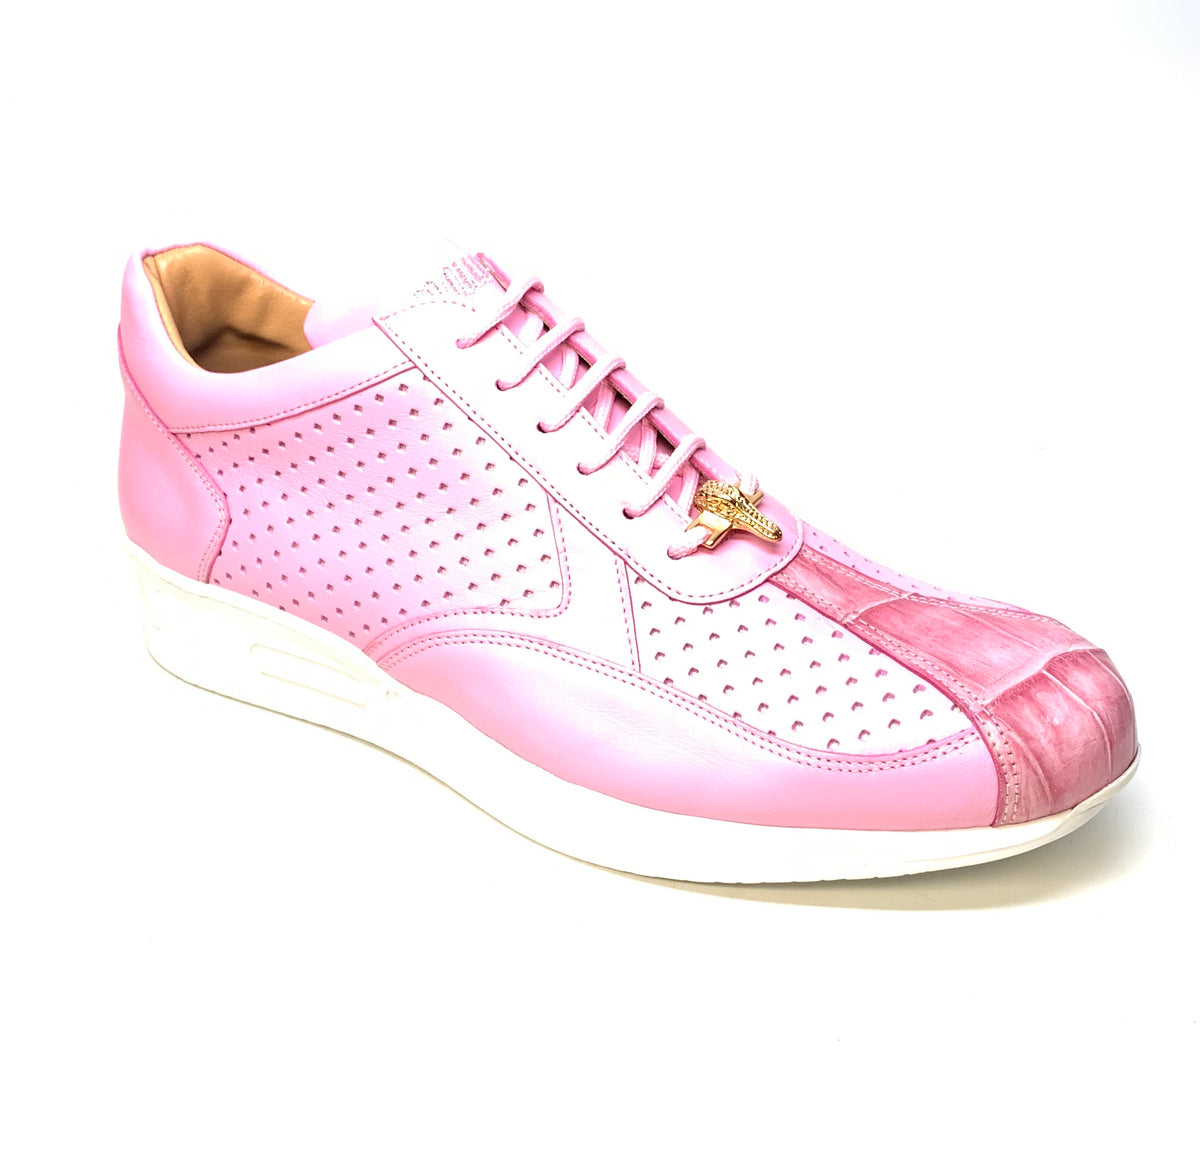 Mauri M770 Pink Crocodile Perforated Nappa Leather Sneaker - Dudes Boutique